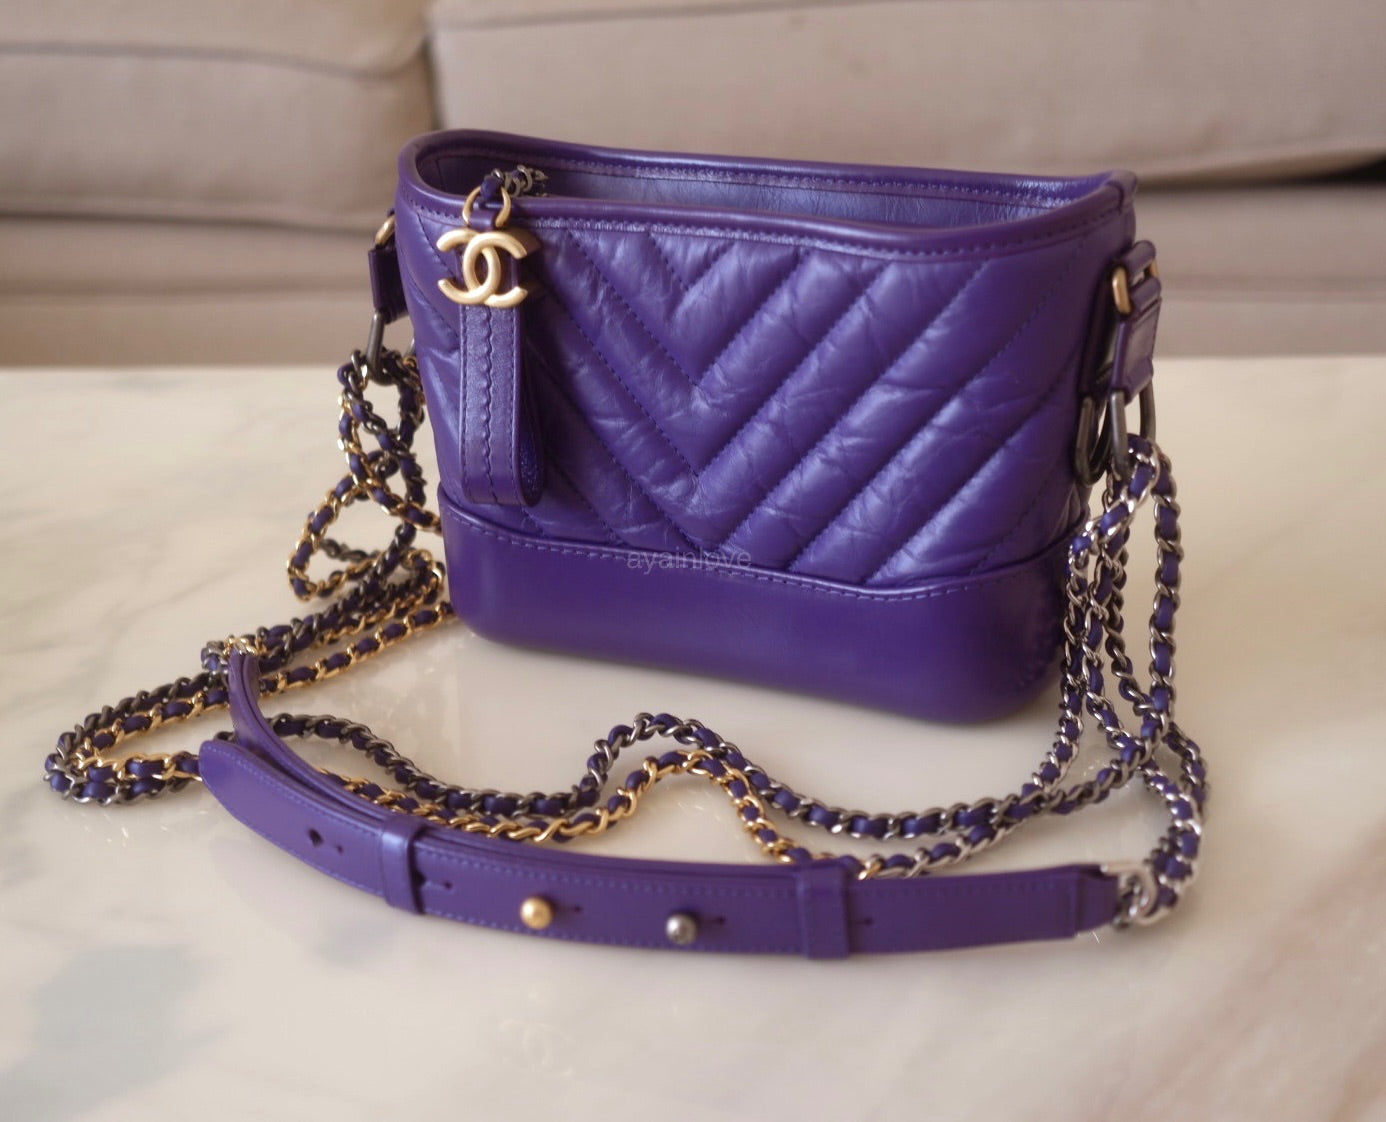 The Chanel Gabrielle Hobo Bag - Size Small